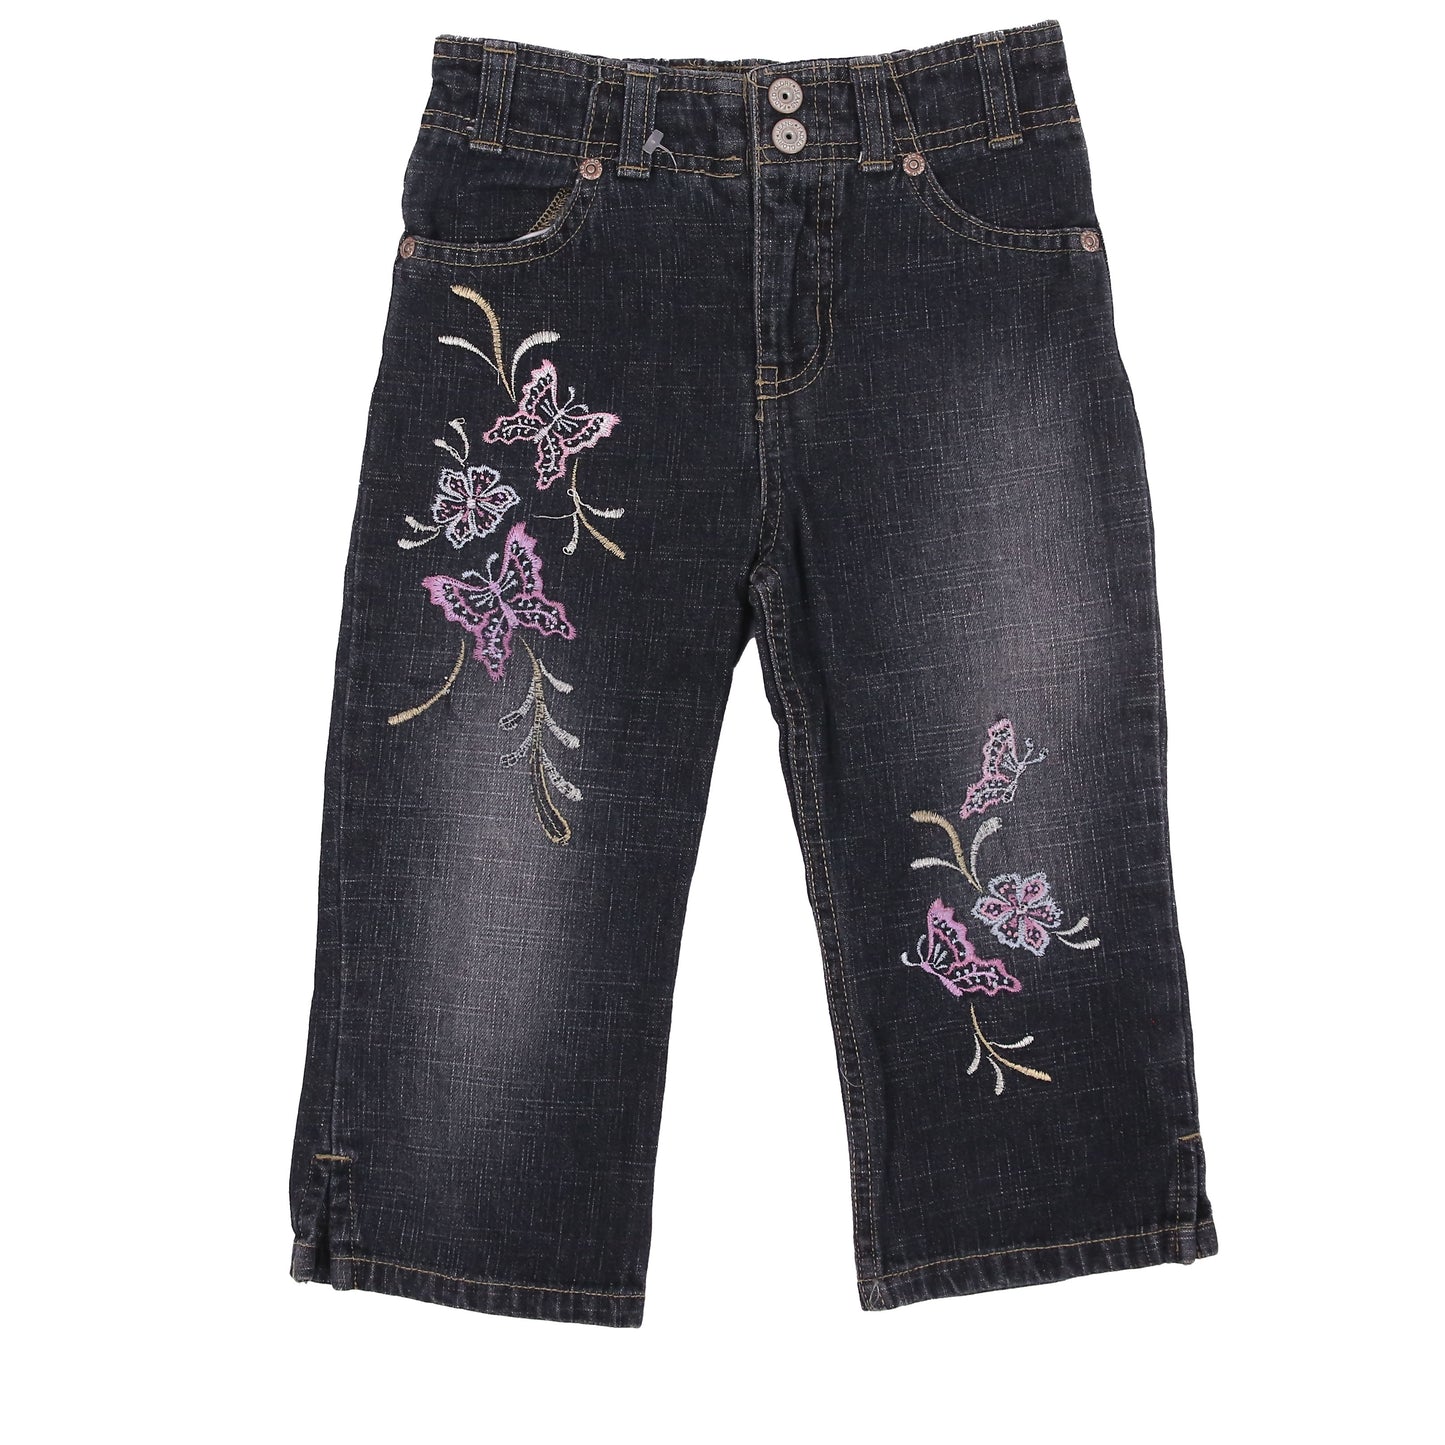 FADED GLORY JEANS